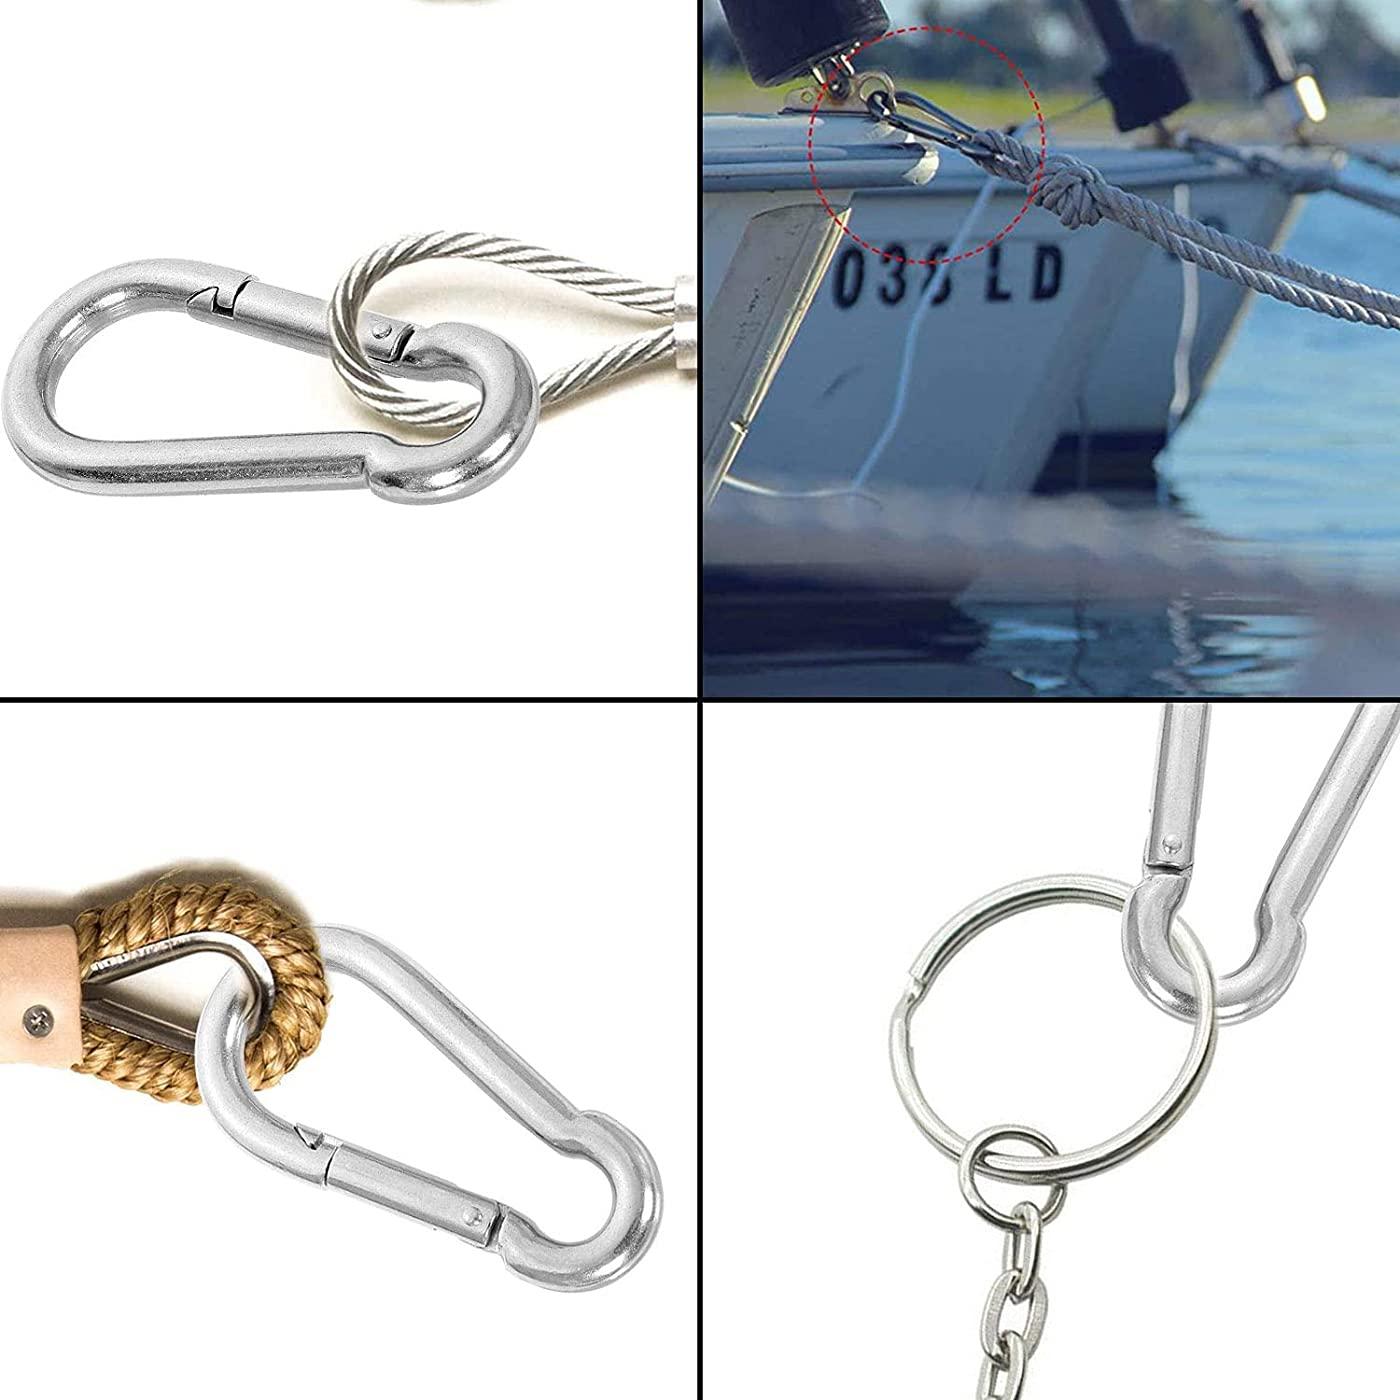 5pcs Stainless Steel Swivel Eye Snap Hook Flag Pole Clips,with 5pcs Snap  Hook Carabiner Diving Clips Spring Hooks for Bird Feeders, Pet Chains, Dog